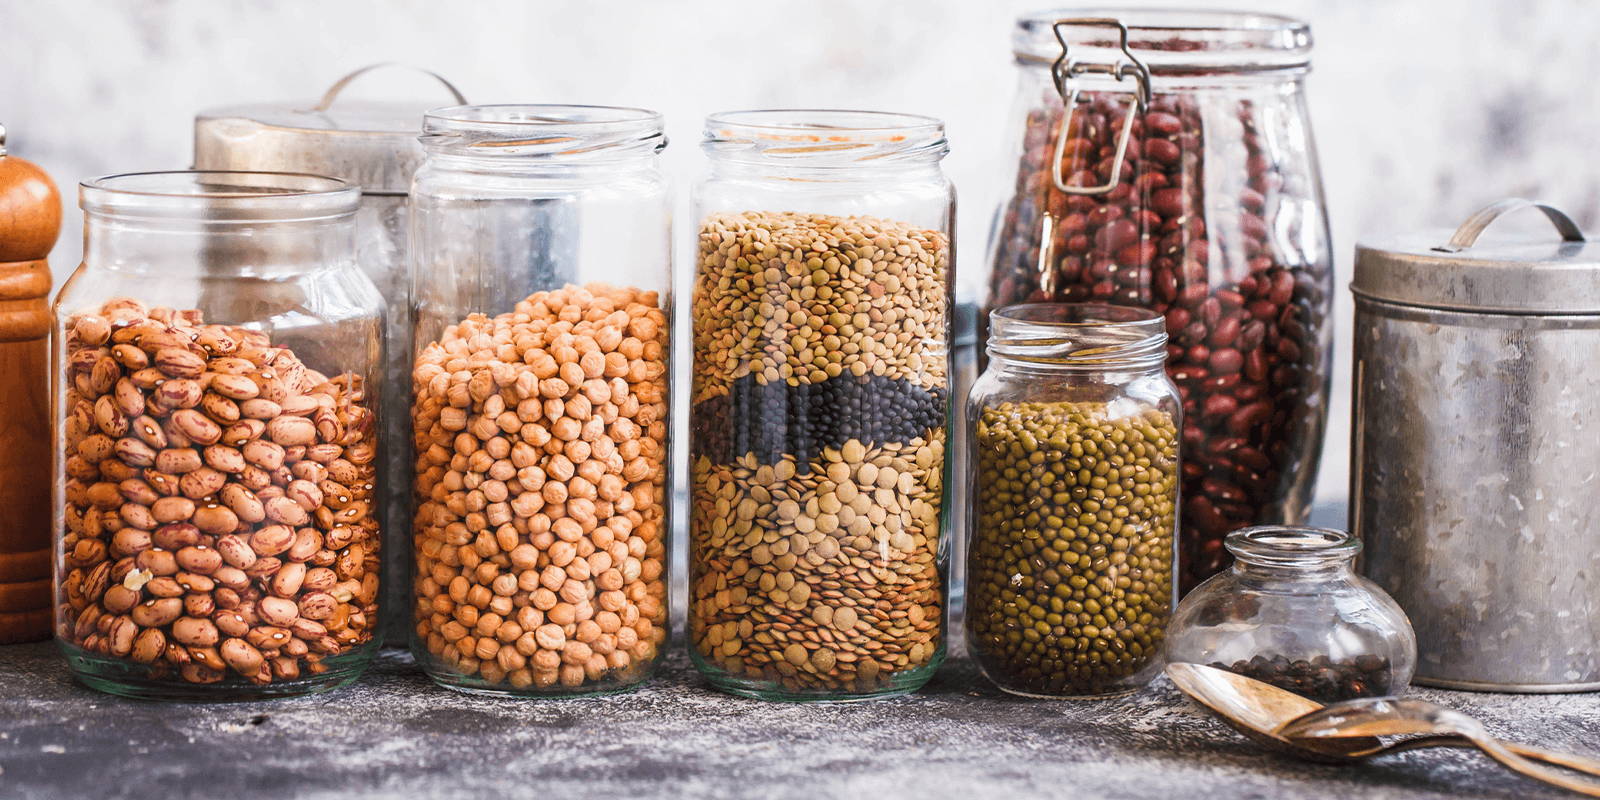 Jars filled with grains and beans.